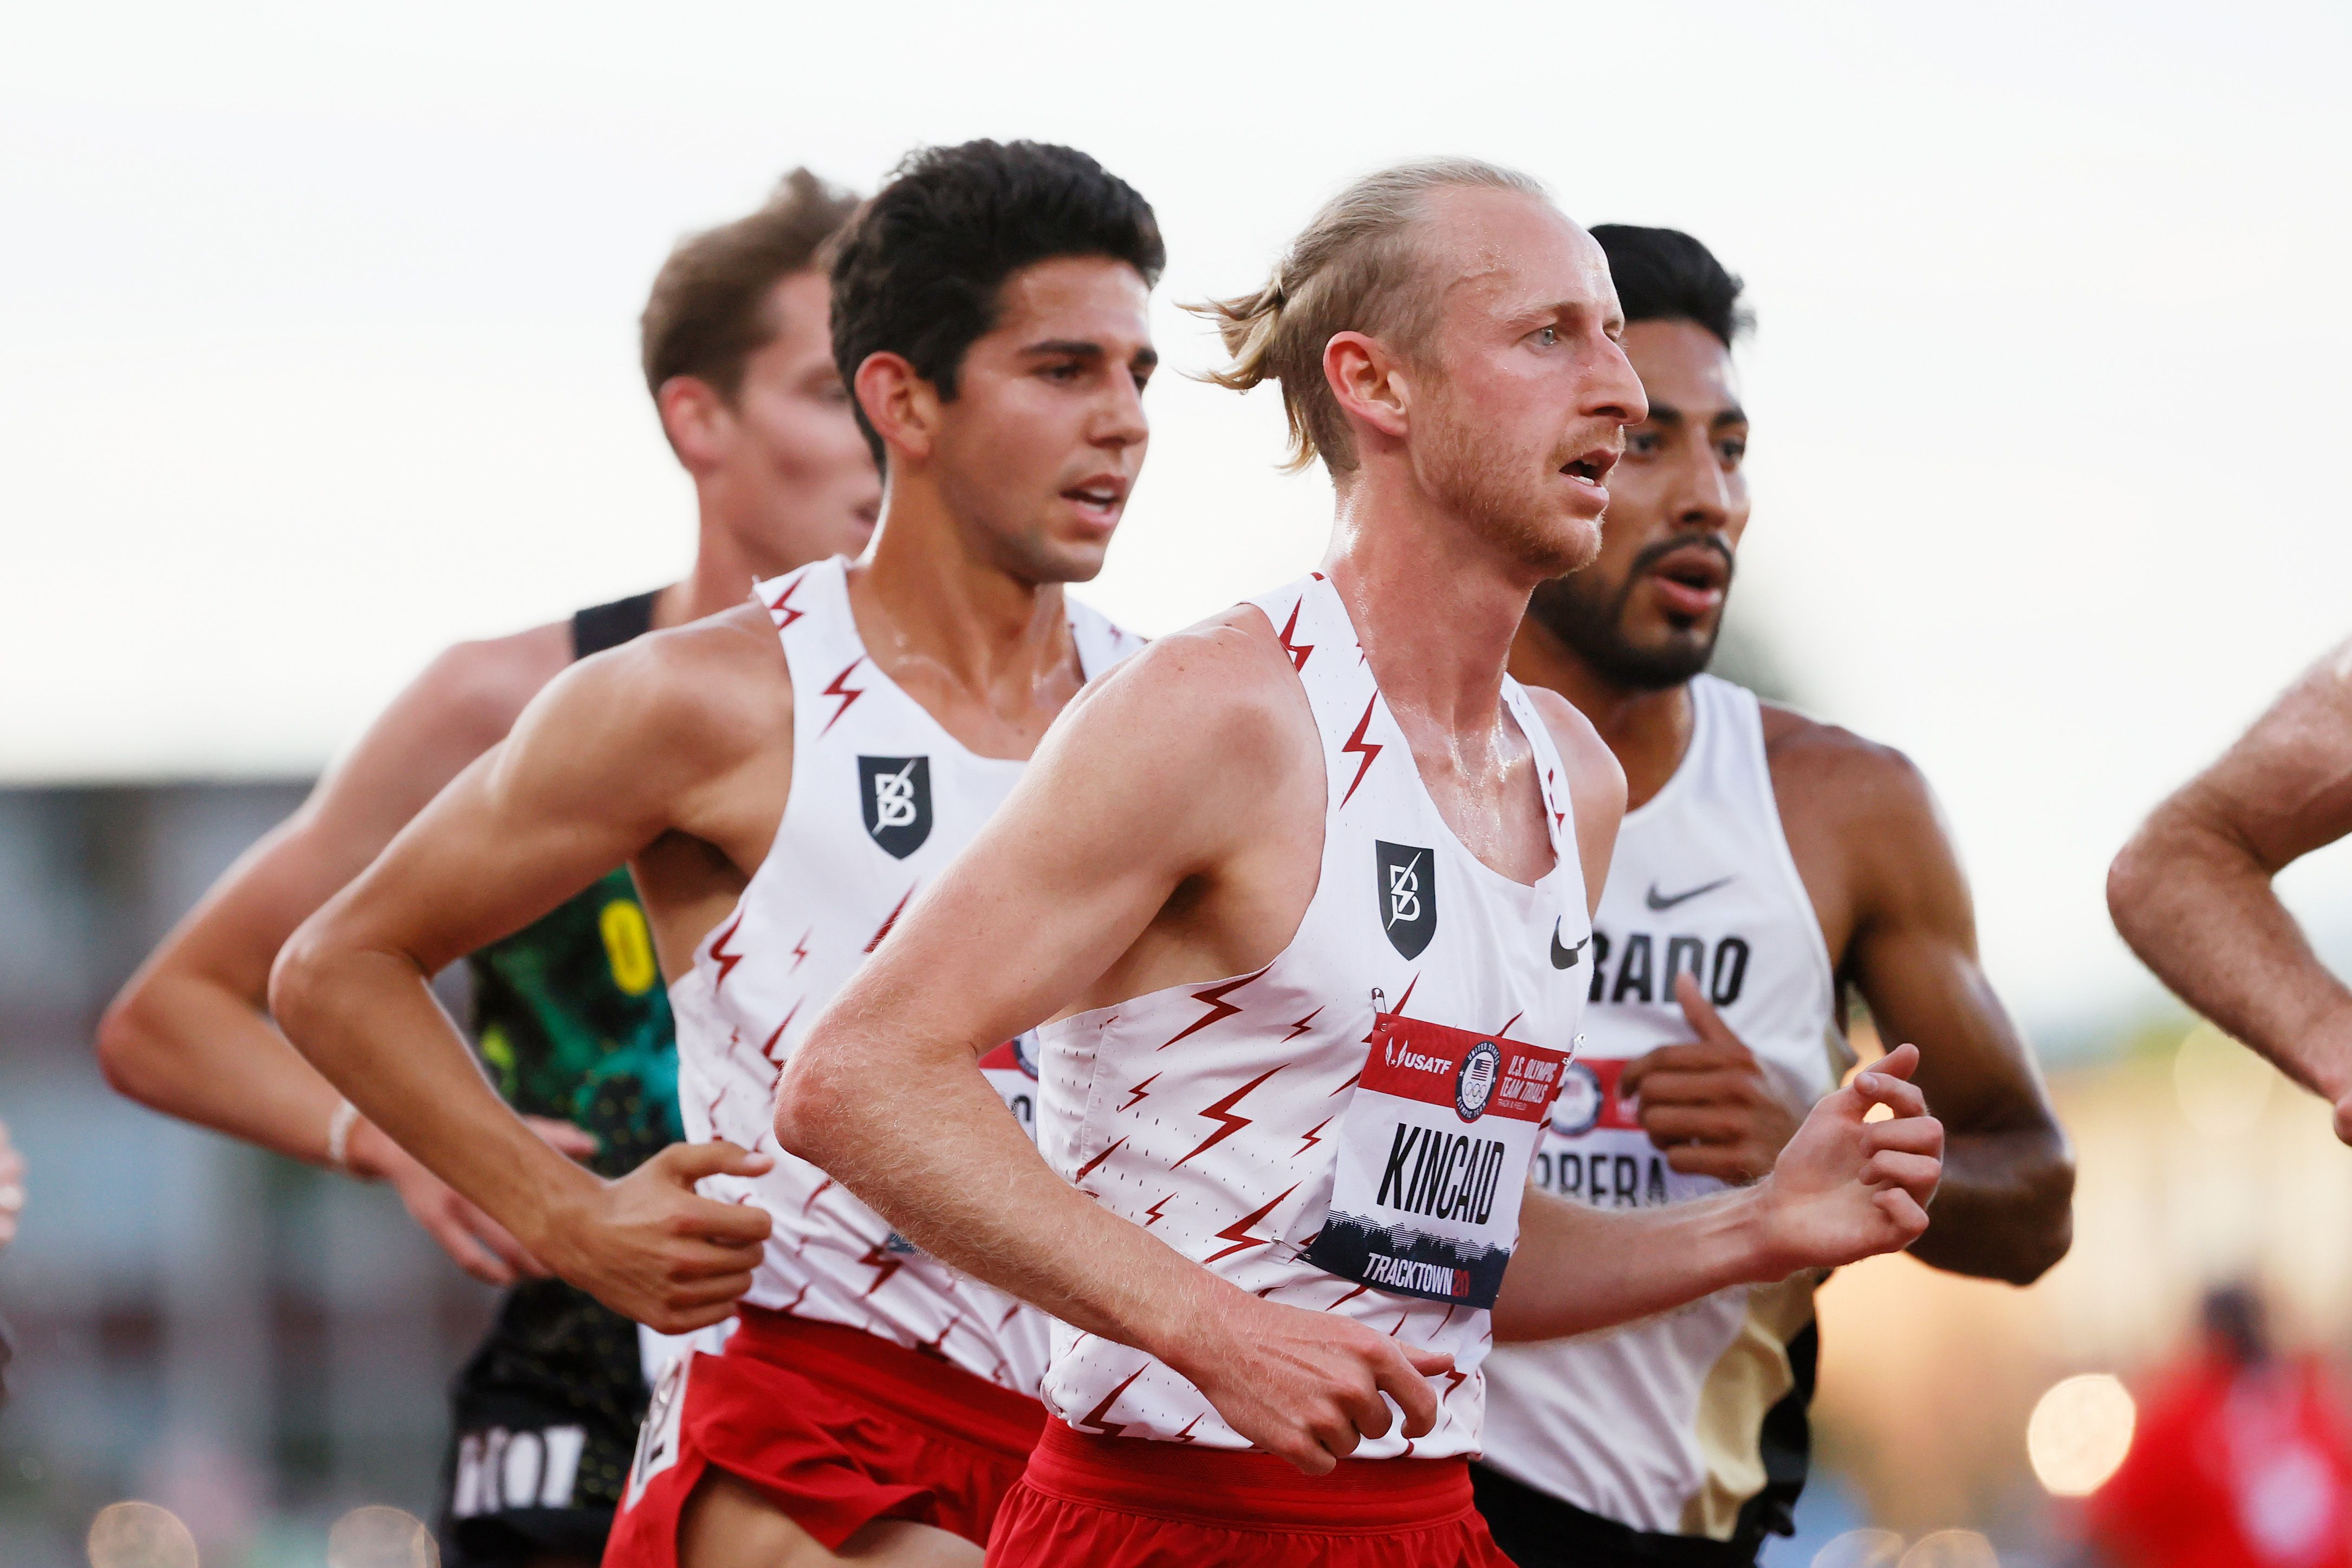 Woody Kincaid, center front, runs the 5,000-meter at the U.S. team trials in June. Photo: Steph Chambers/Getty Images